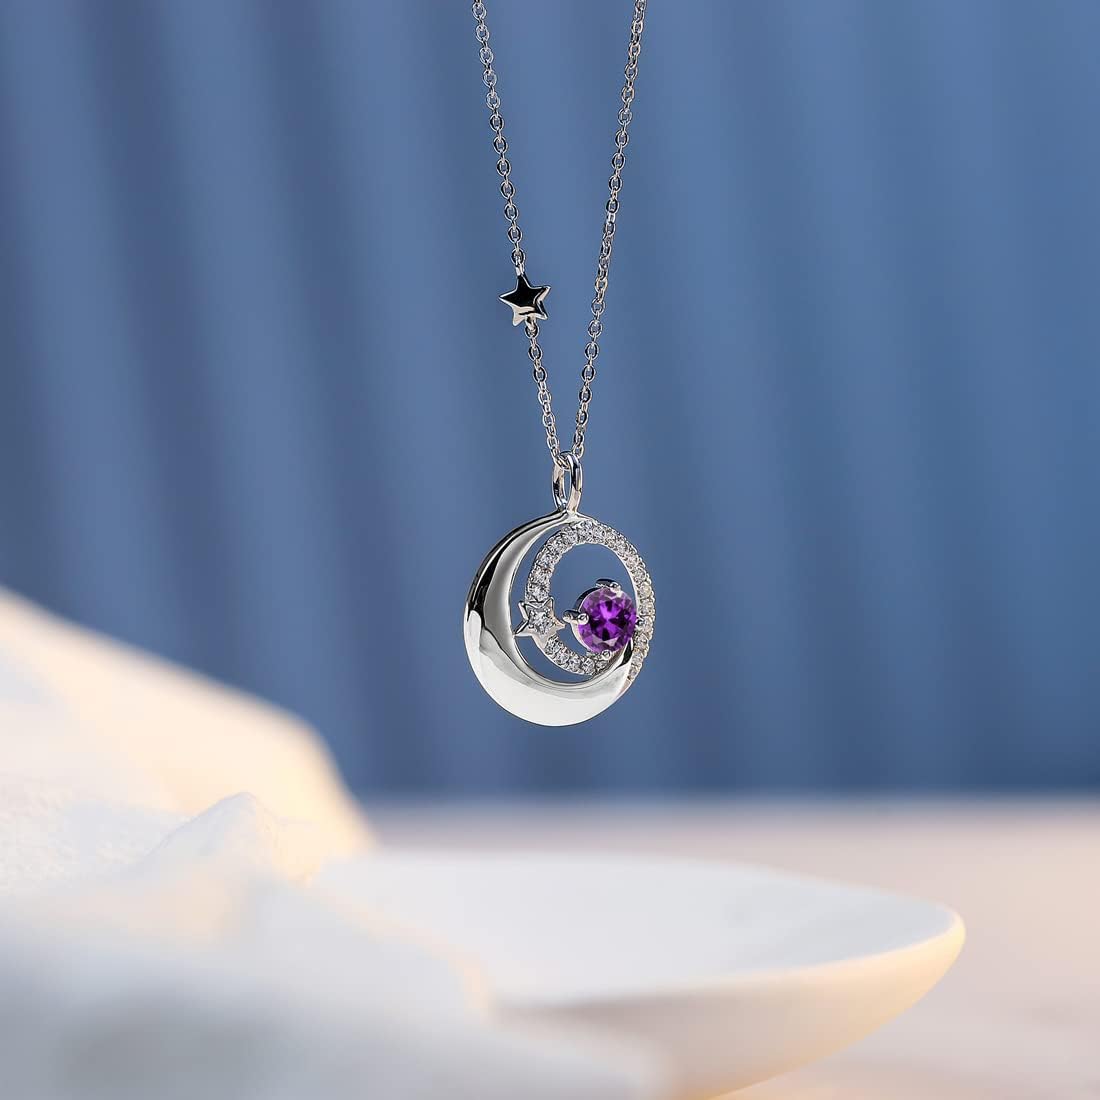 Birthstone Necklaces 925 Sterling Silver Moon and Star